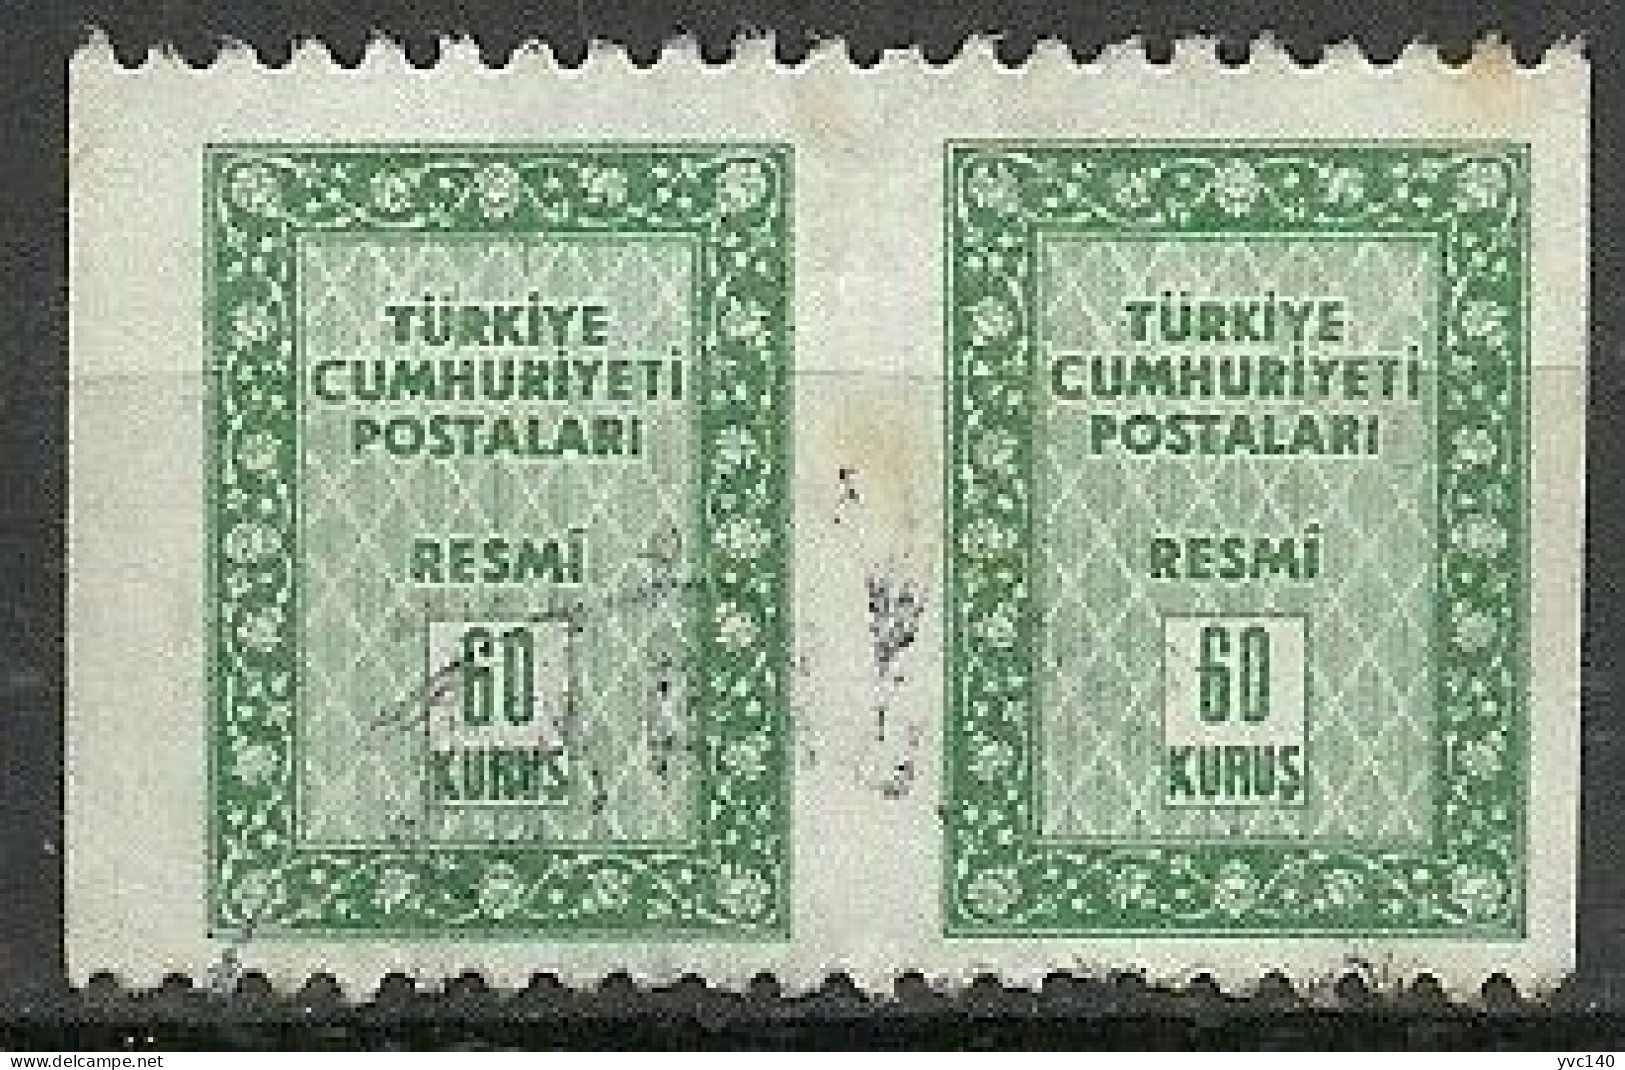 Turkey; 1960 Official Stamp 60 K. ERROR "Partially  Imperf." - Timbres De Service